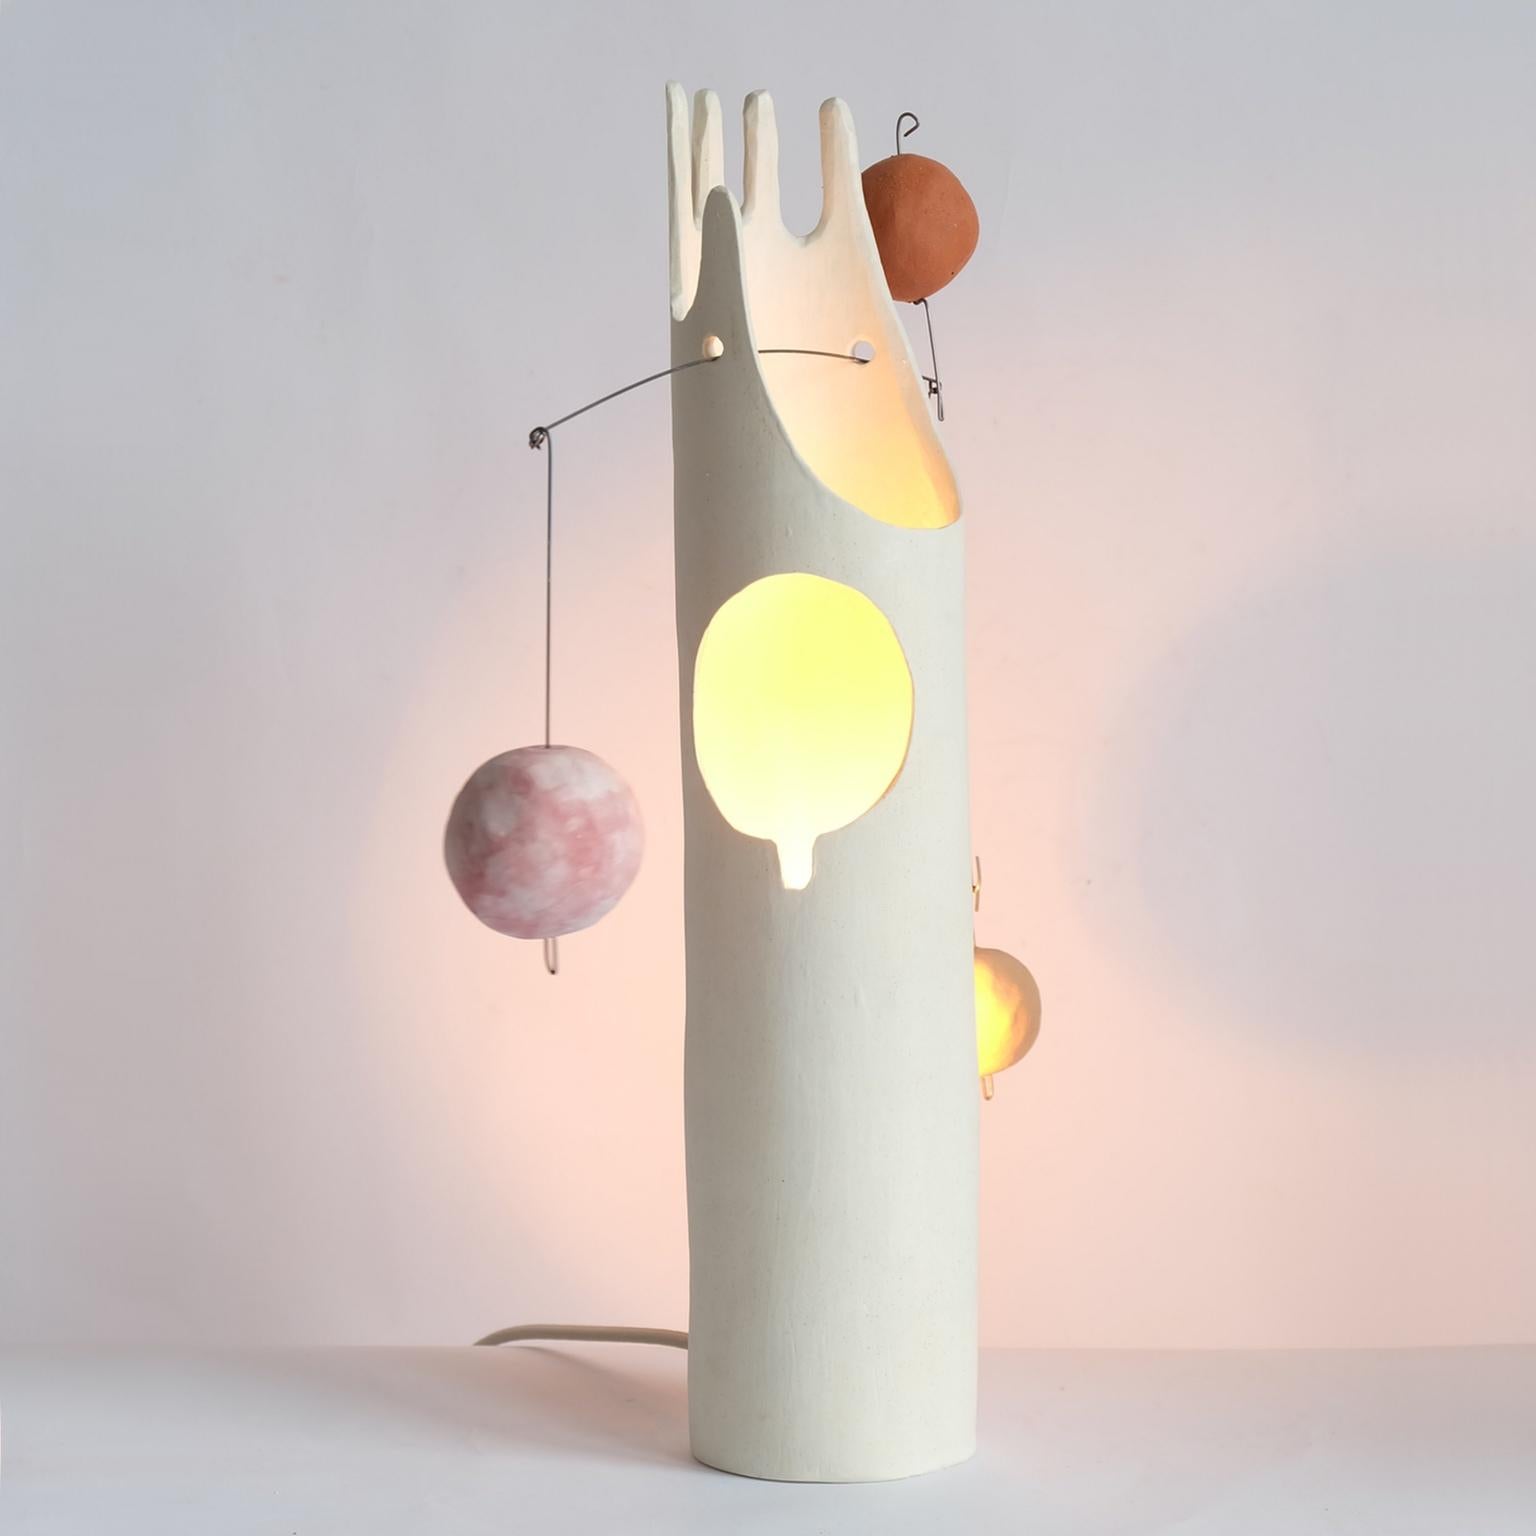 Nico's Cousin Mico is a contemporary hand-built sculptural ceramic table lamp that inspires the joy of working with hands through unpacking, assembling and balancing weights. The handmade ceramic globes and the hanging steel wire come fit right